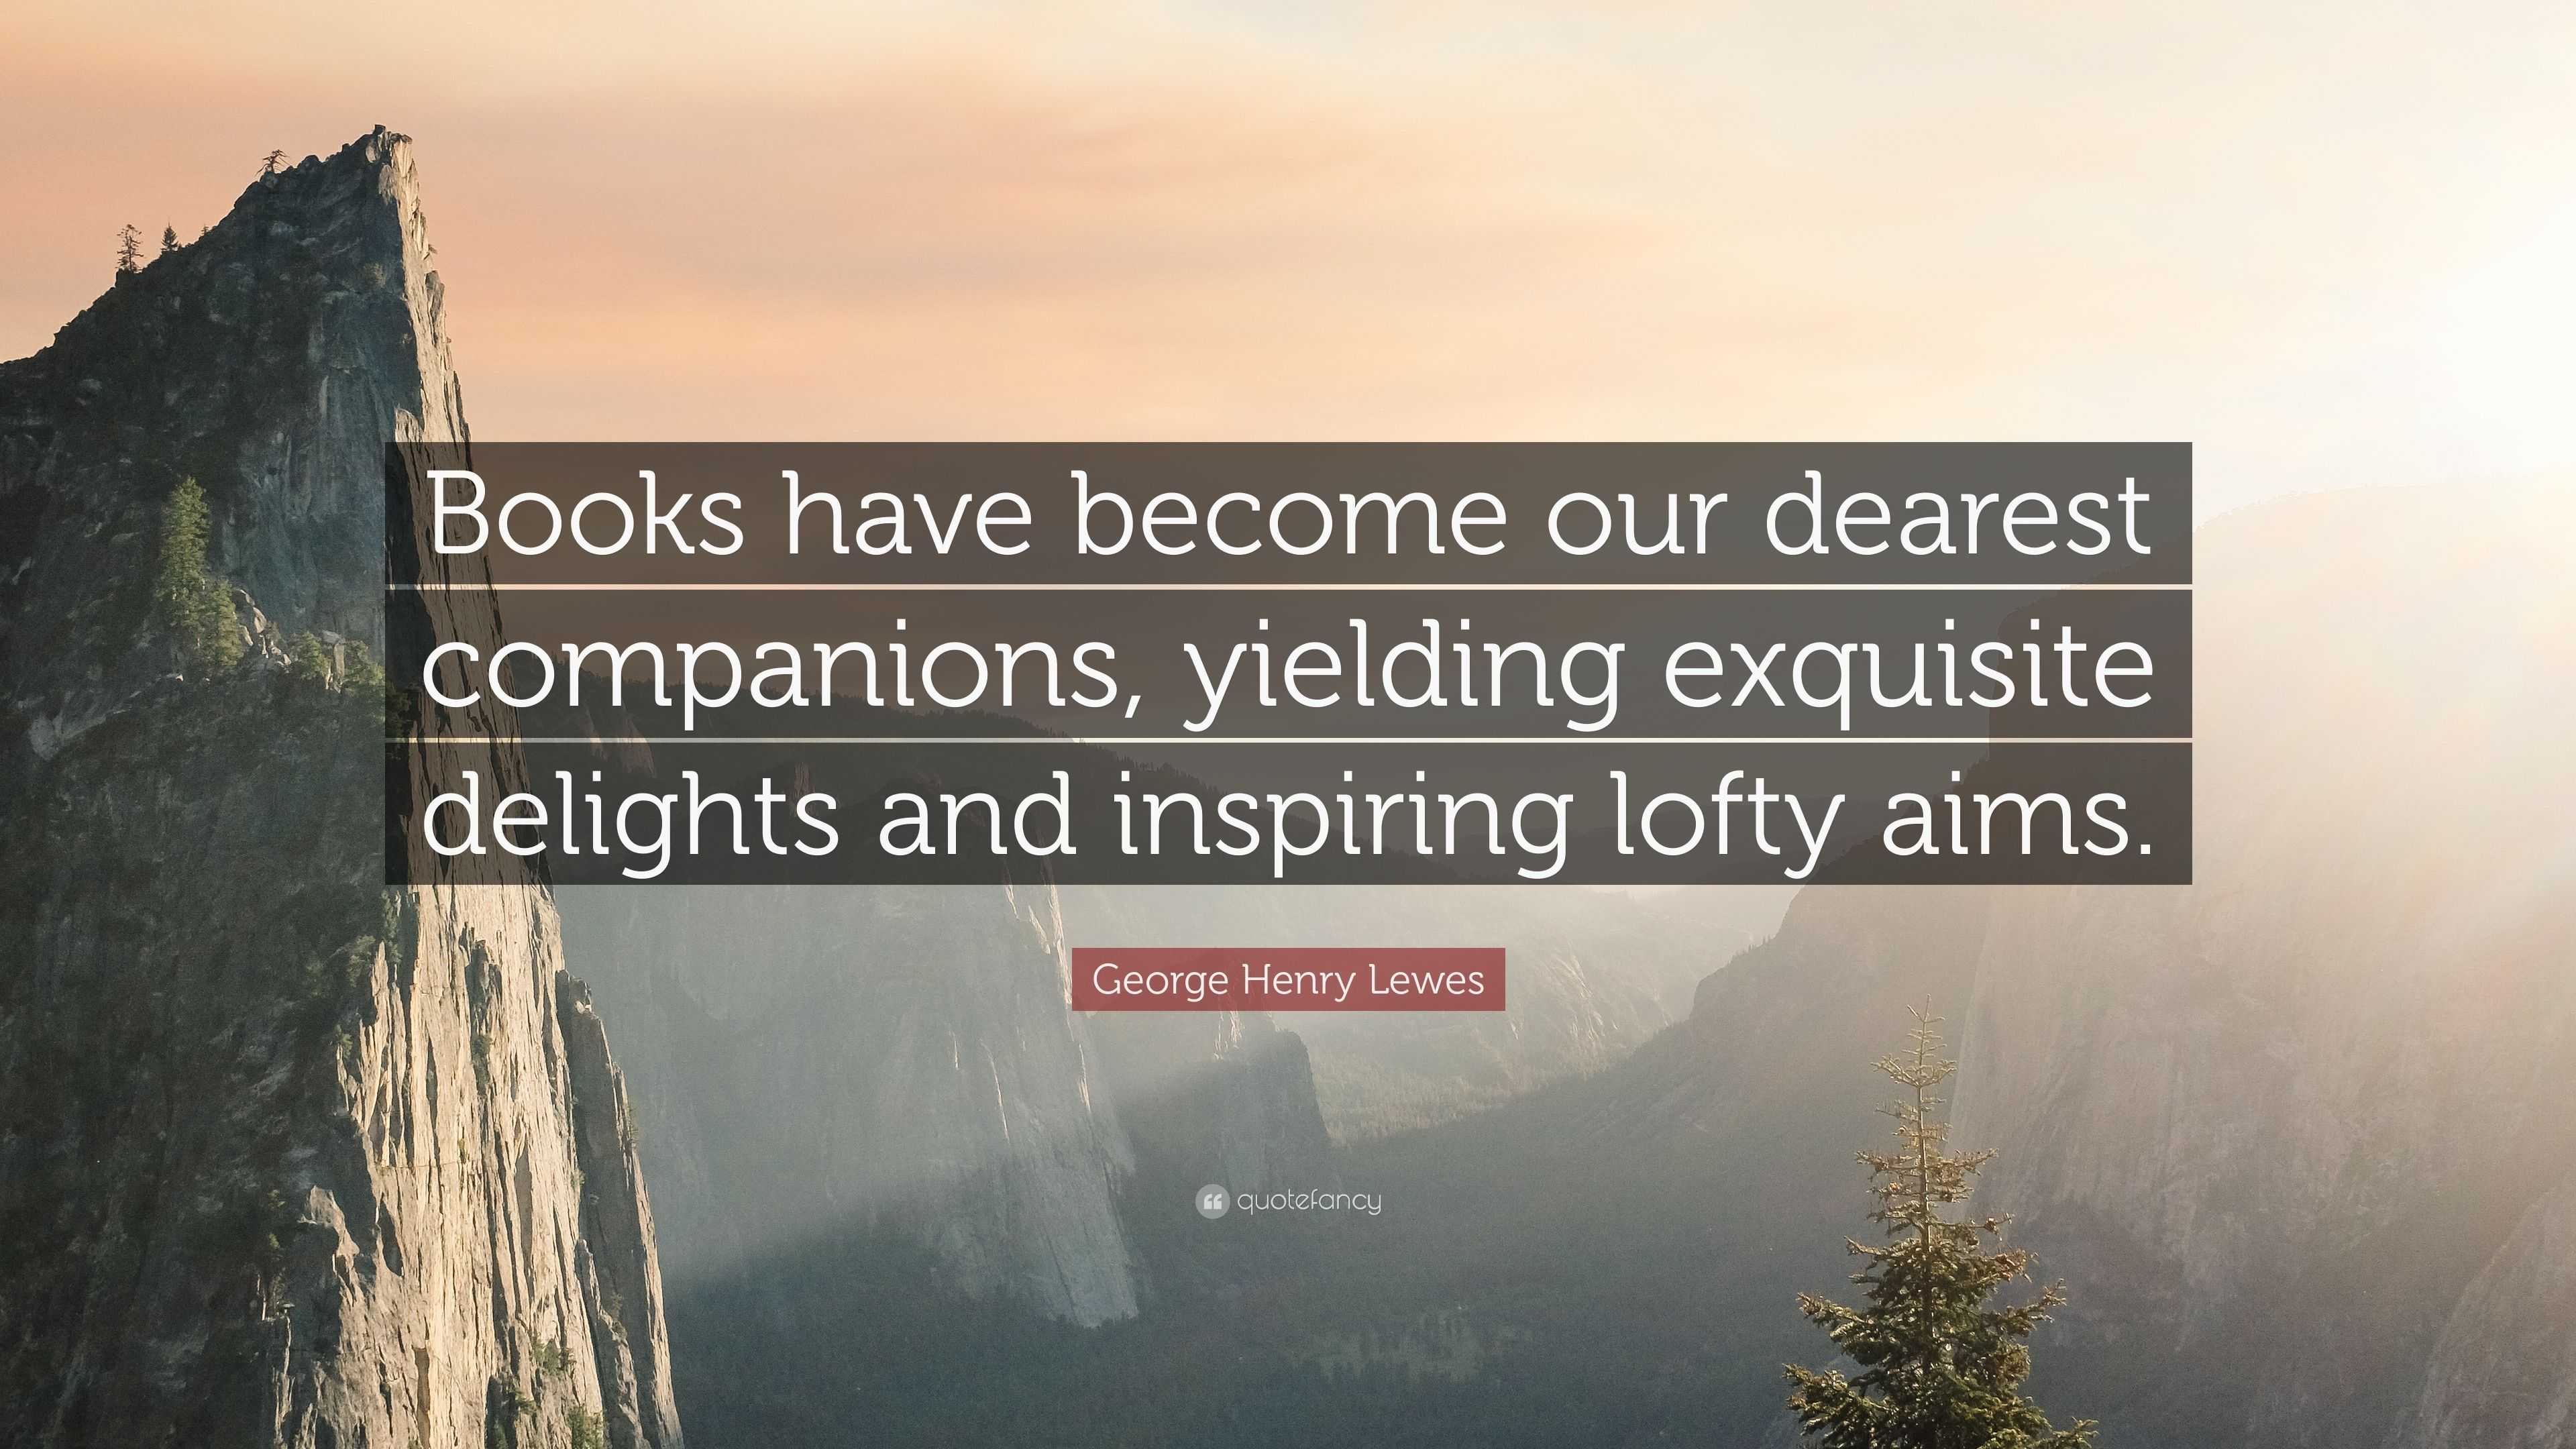 George Henry Lewes Quote: “Books have become our dearest companions ...